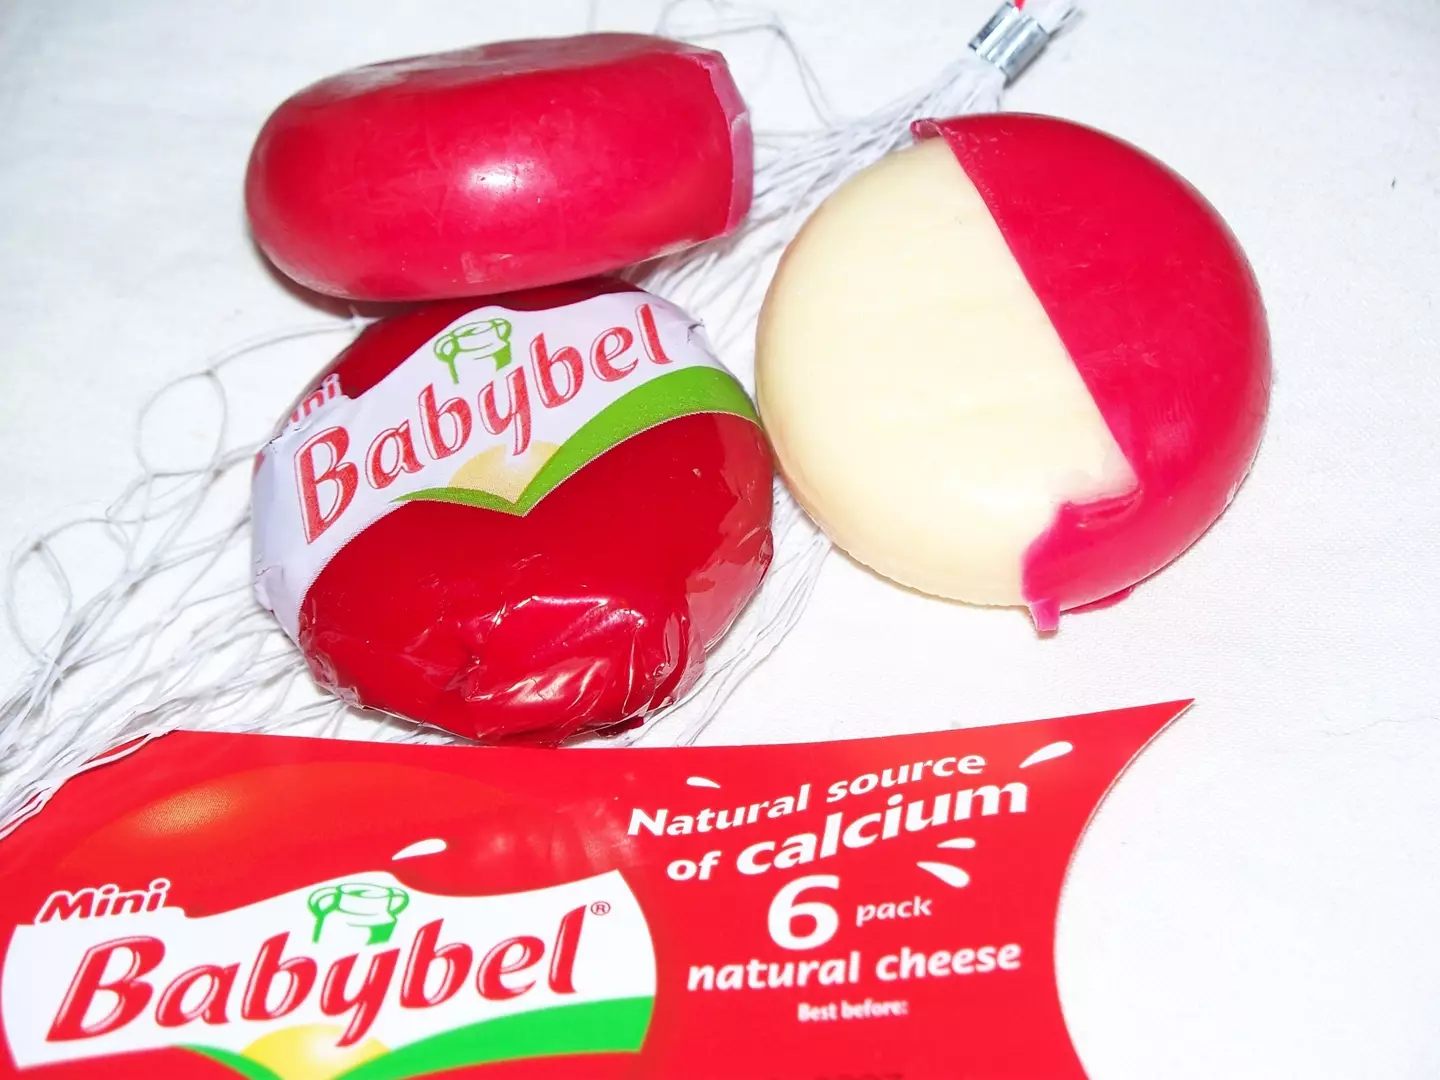 A mum has revealed why her son 'really hates' Babybels.